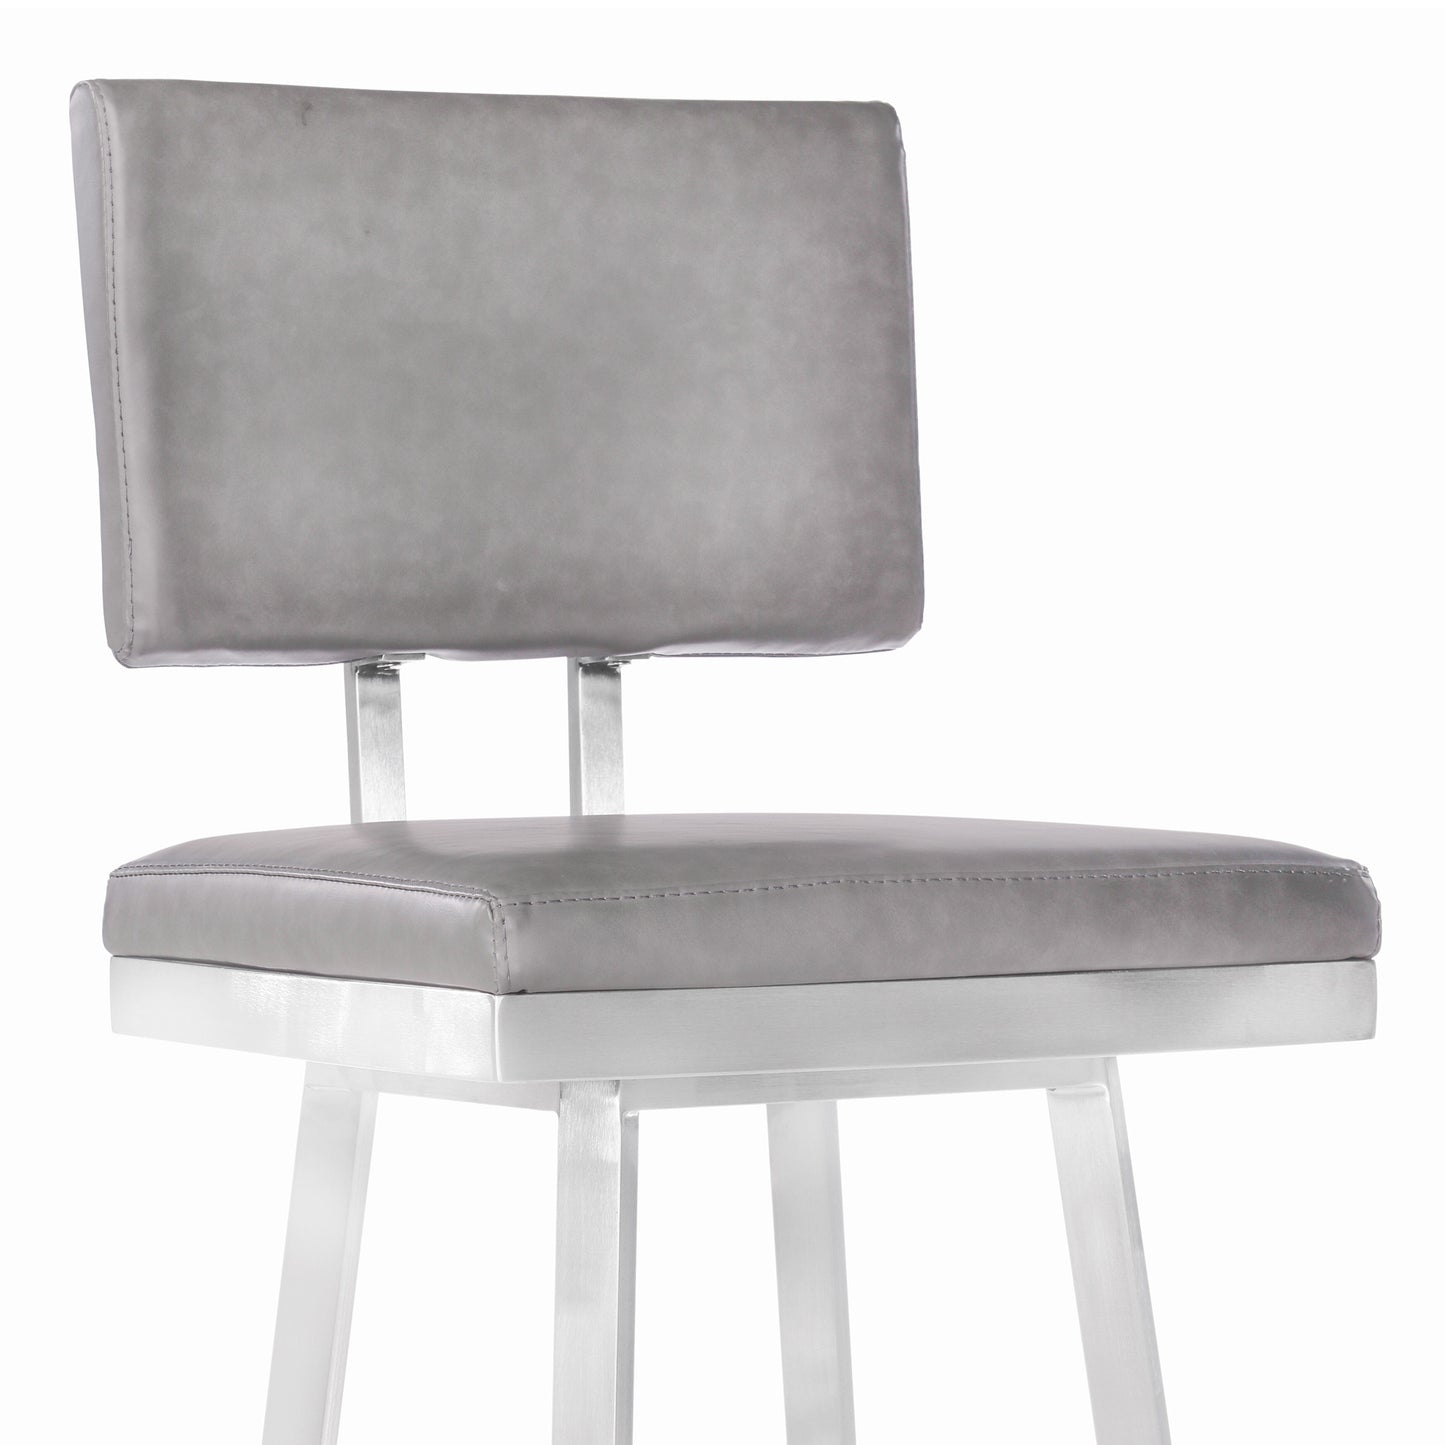 30" Vintage Gray on Stainless Faux Leather Rectangular Swivel Armless Barstool